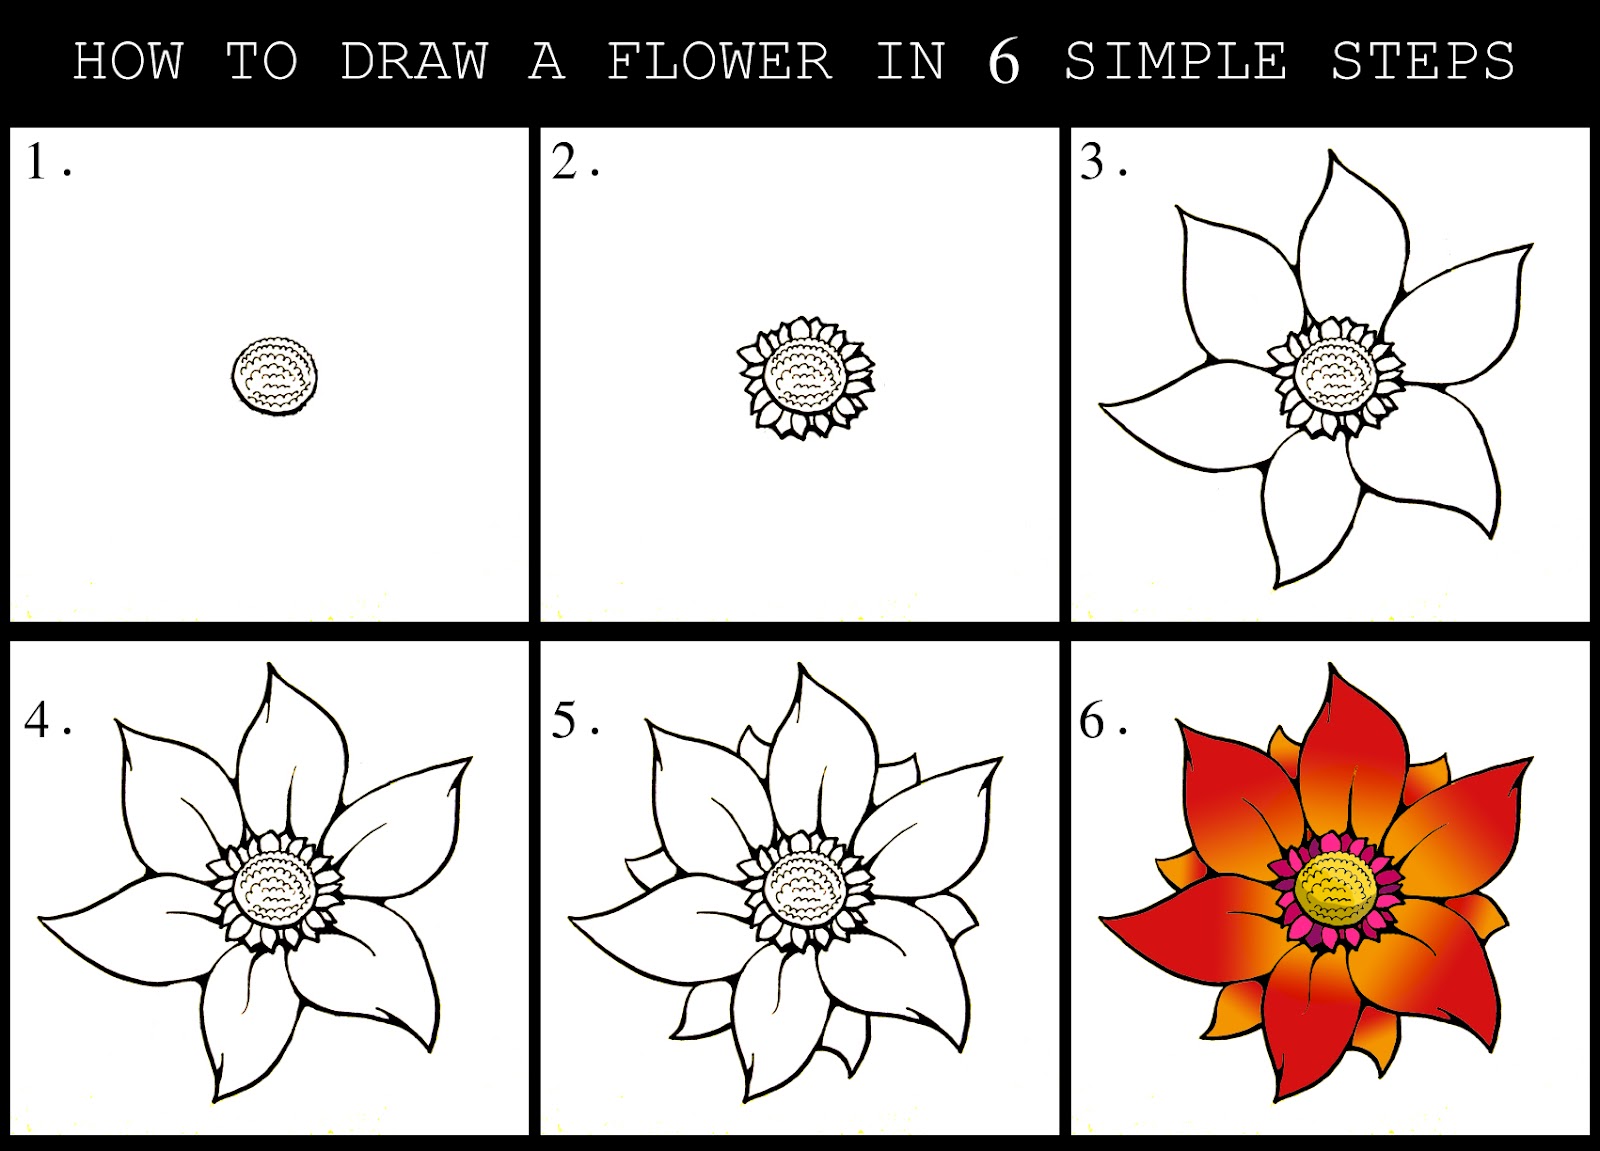 DARYL HOBSON ARTWORK: How To Draw A Flower Step By Step